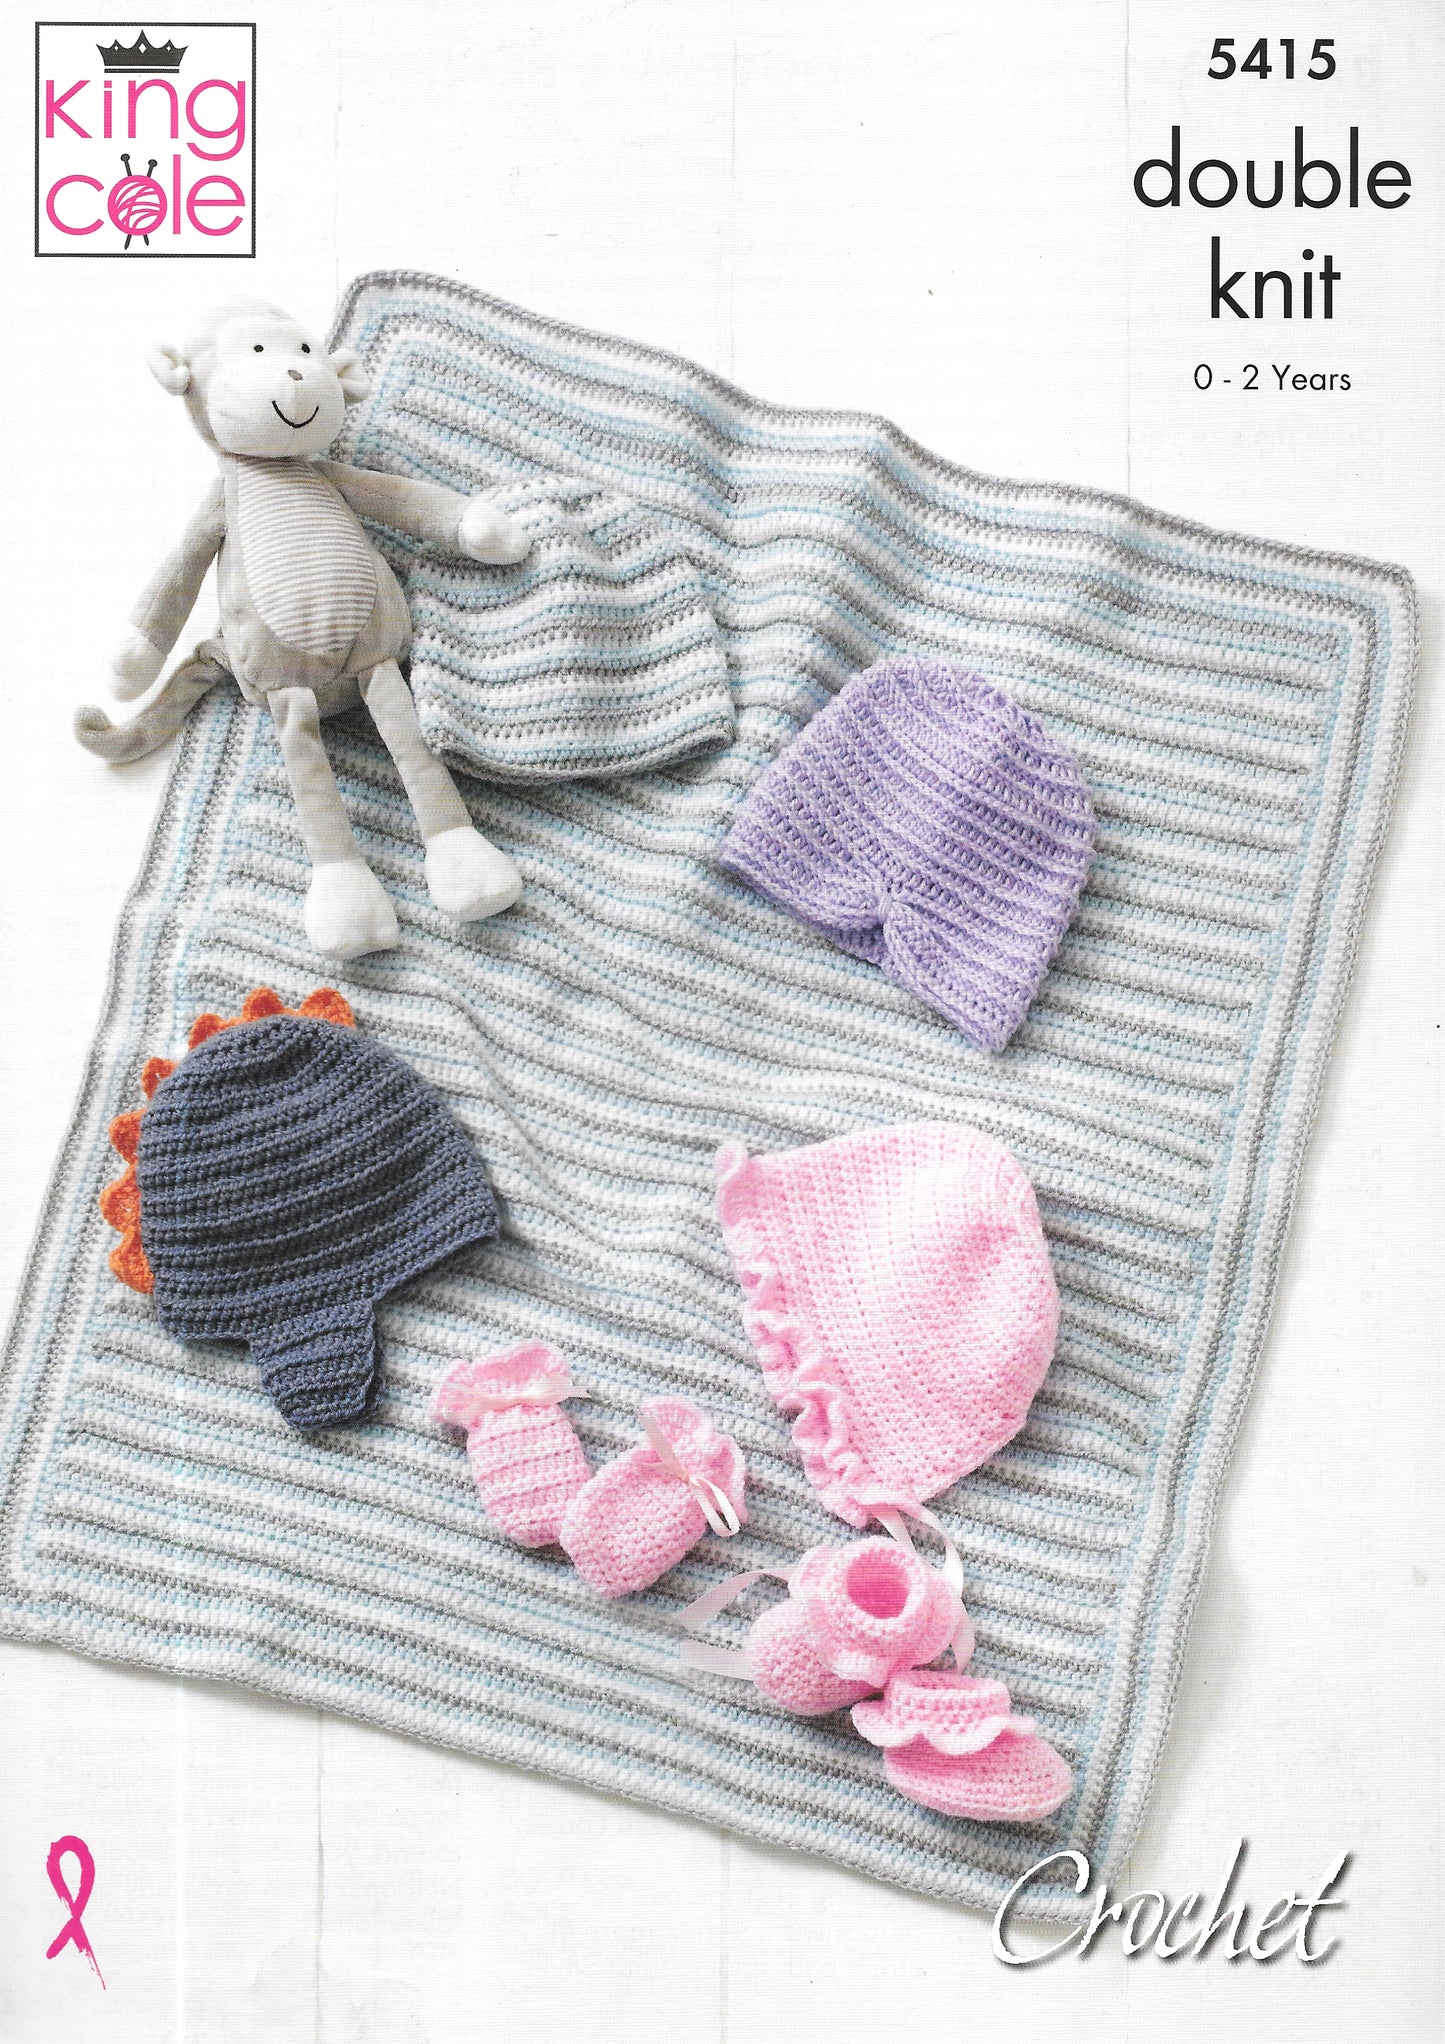 5415 King Cole Crochet pattern. Baby Hats, mitts, bootees and blanket. DK